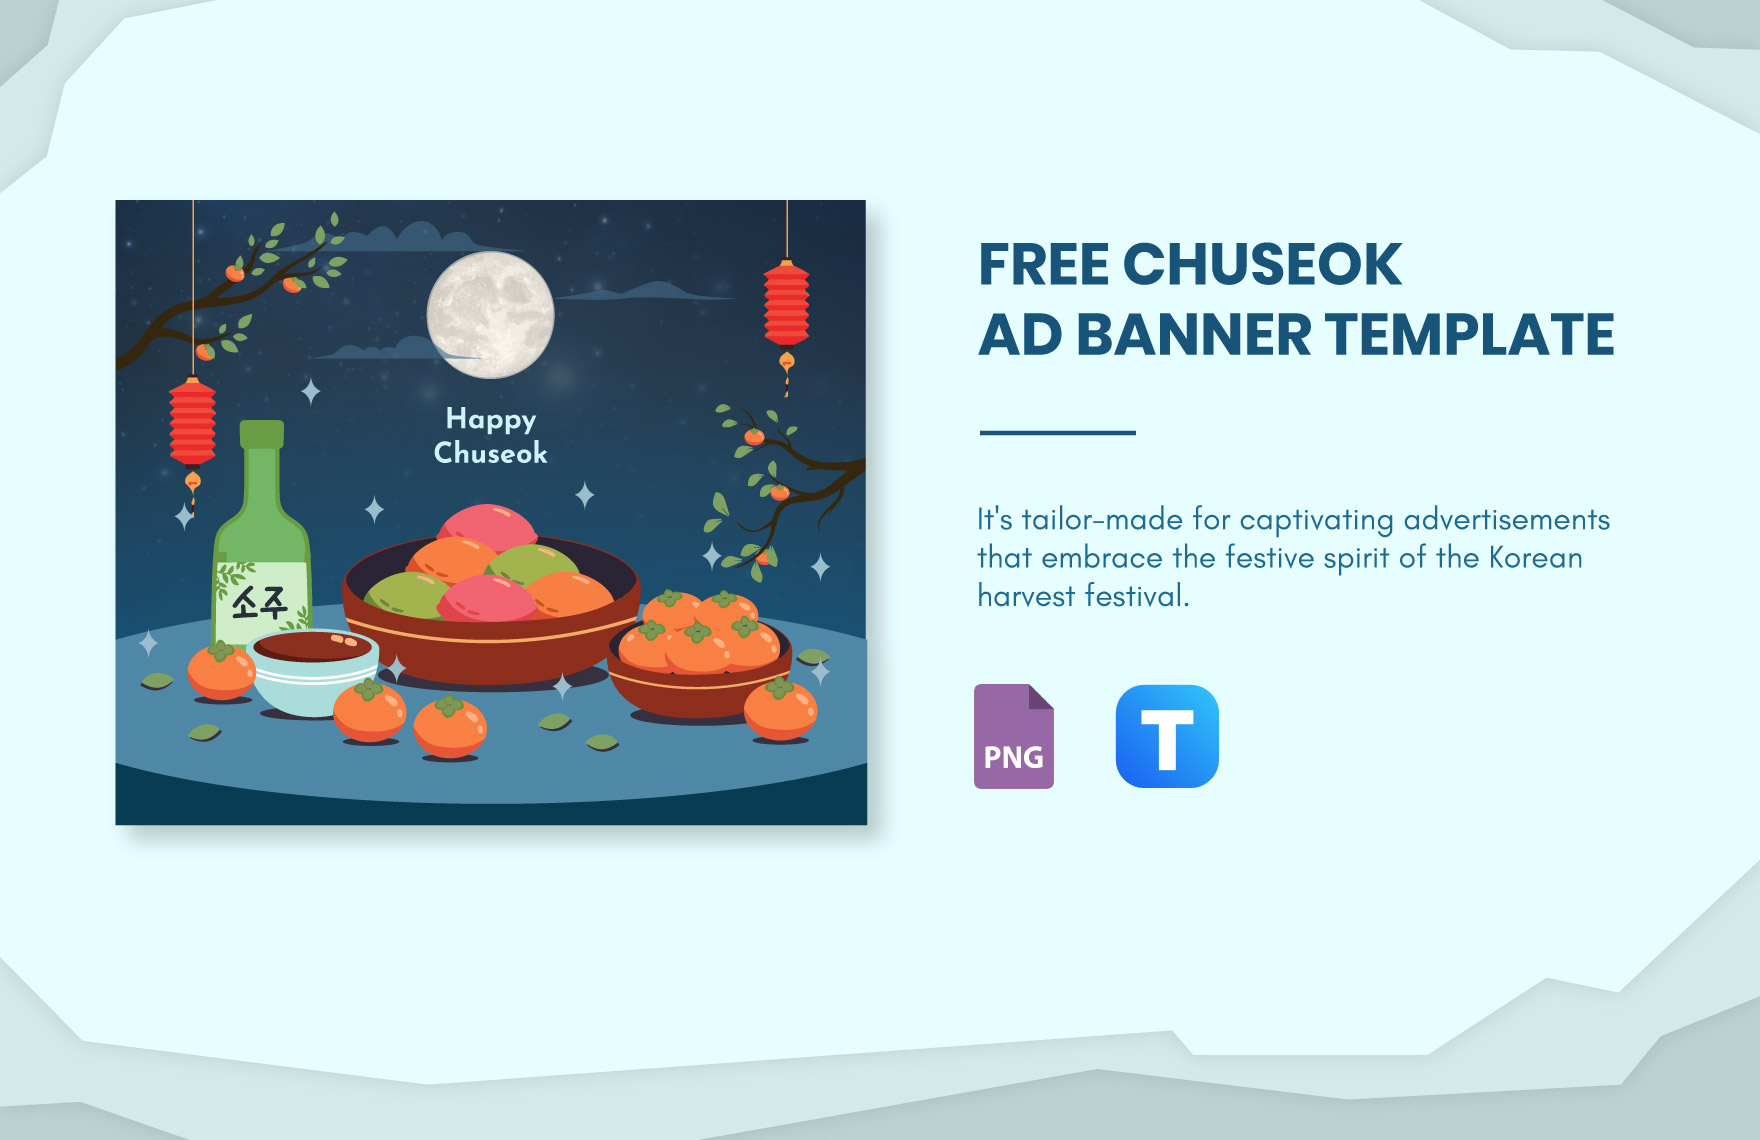 Free Chuseok Ad Banner Template in PNG